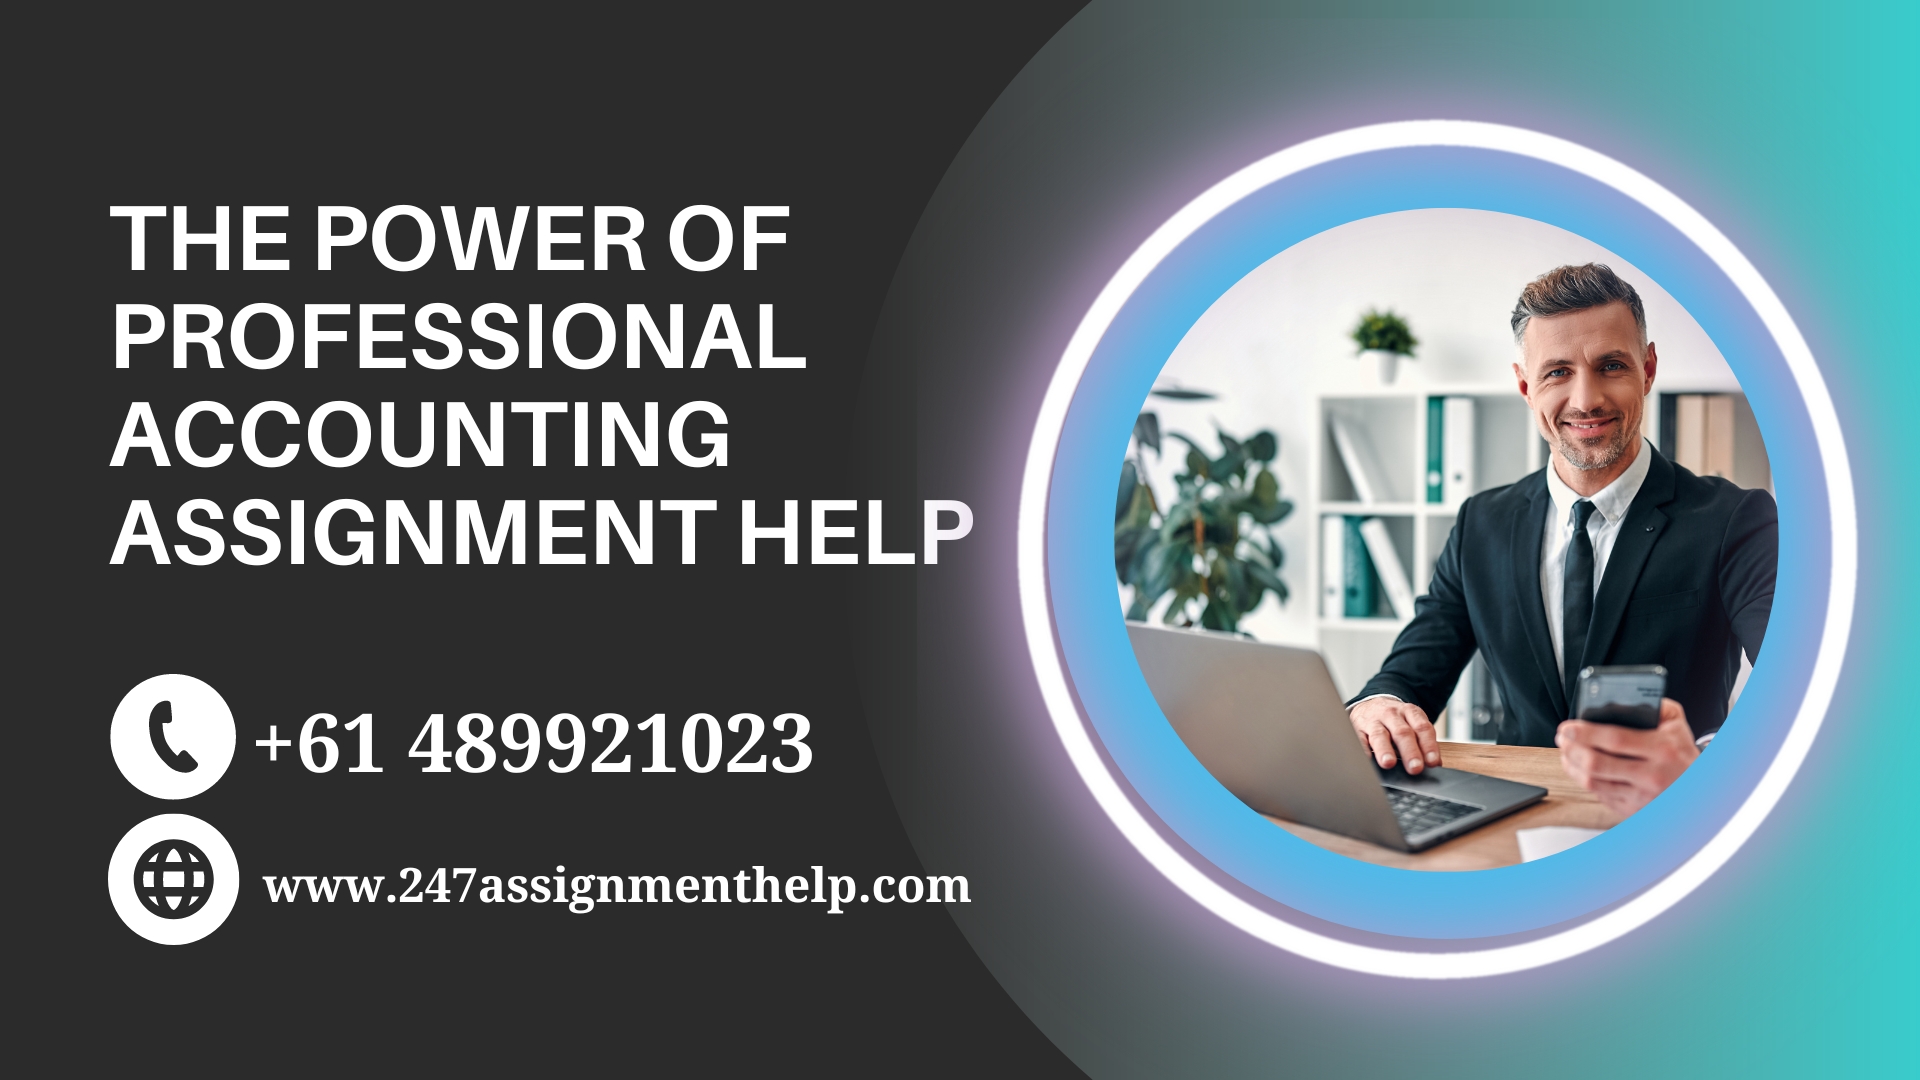 The Power of Professional Accounting Assignment Help